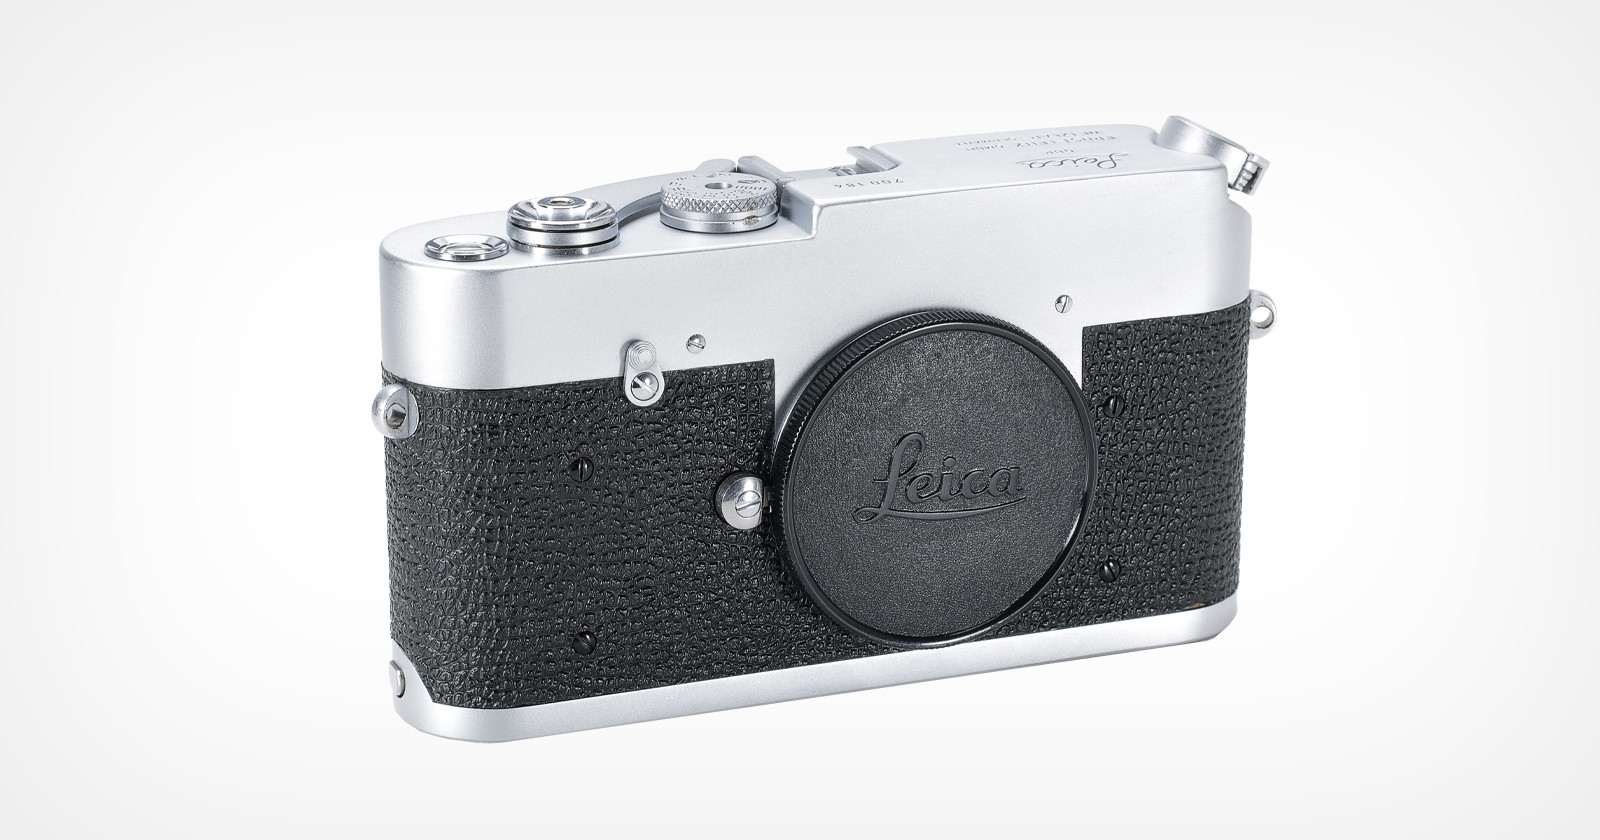 Prototype Square Format Leica M from 1954 Sells for $667,765